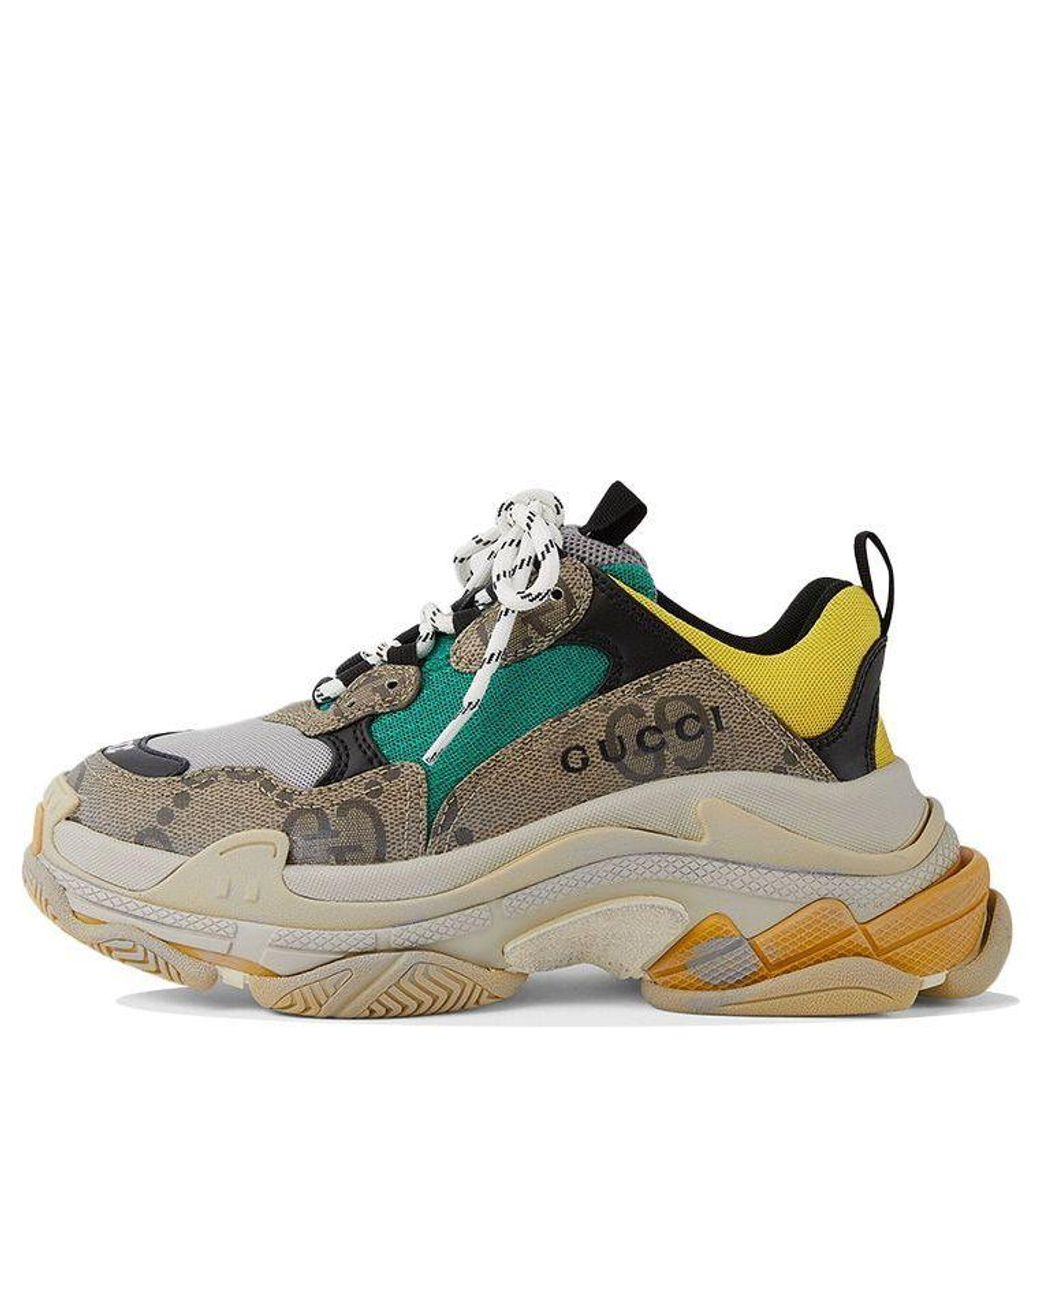 Gucci x Balenciaga Triple S The Hacker Project Chunky Sneakers  Brown  Sneakers Shoes  GBUAC20489  The RealReal